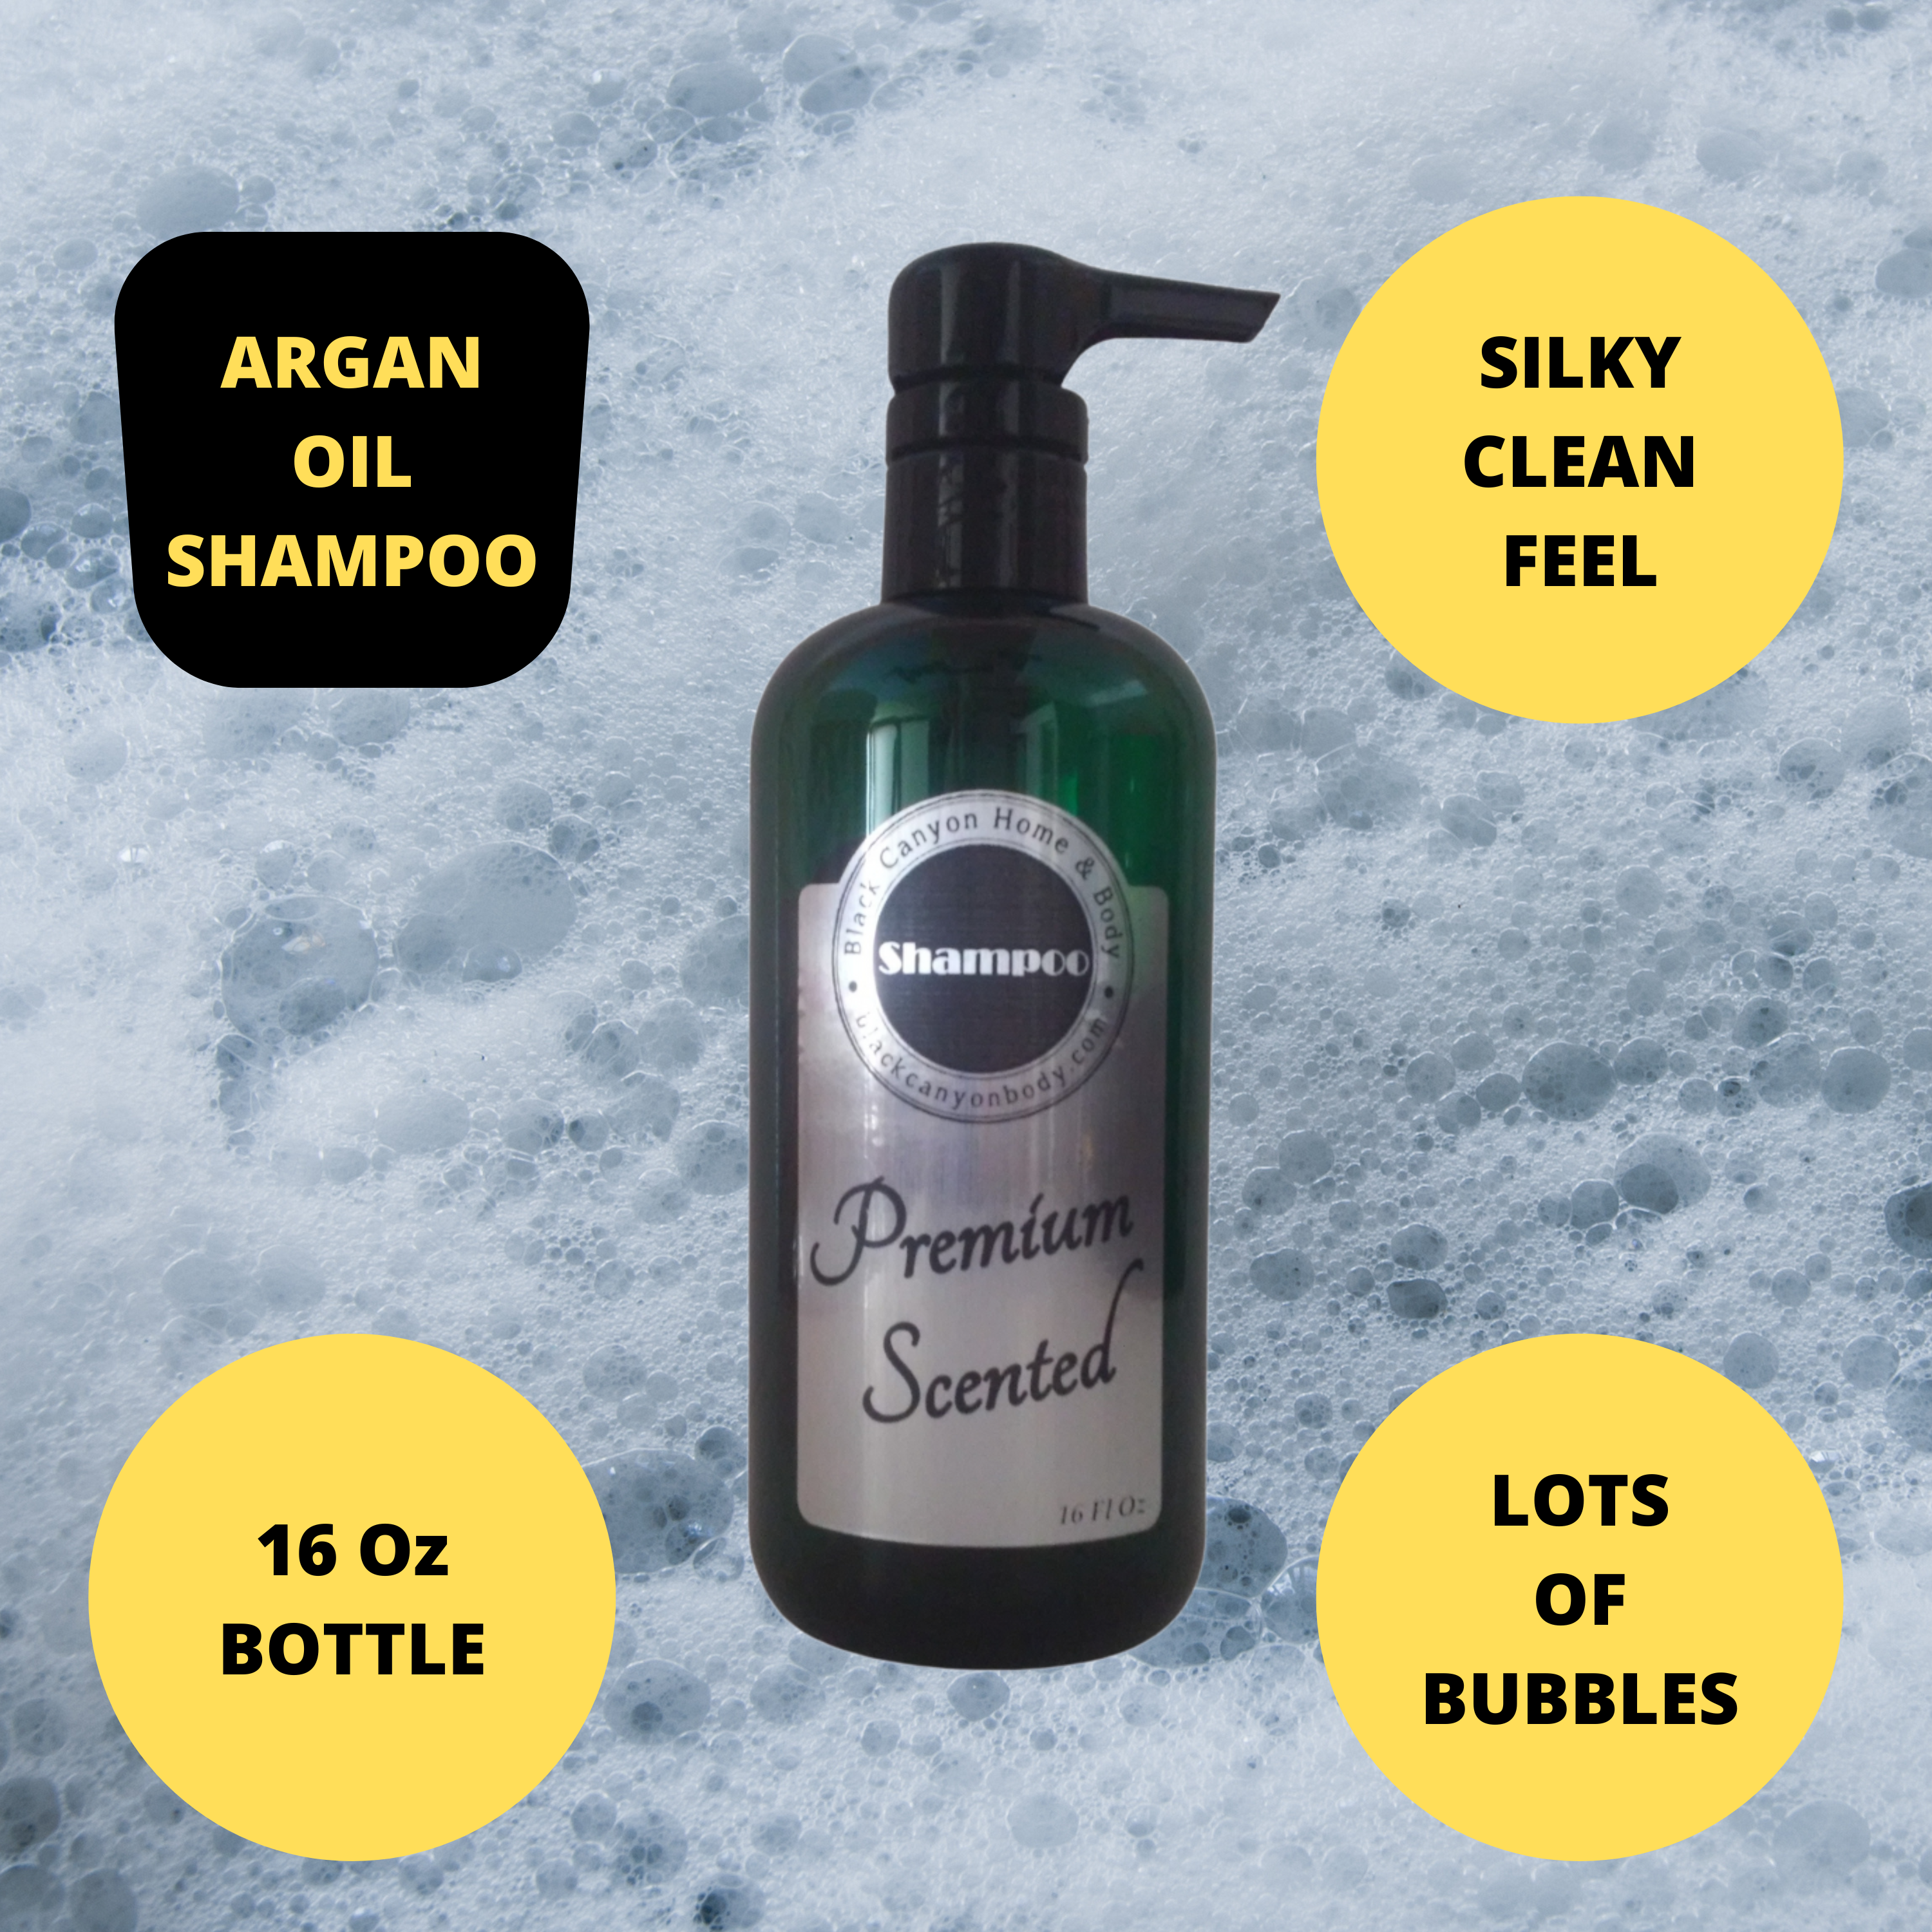 Black Canyon Berry Shortcake & Whipped Cream Scented Shampoo with Argan Oil